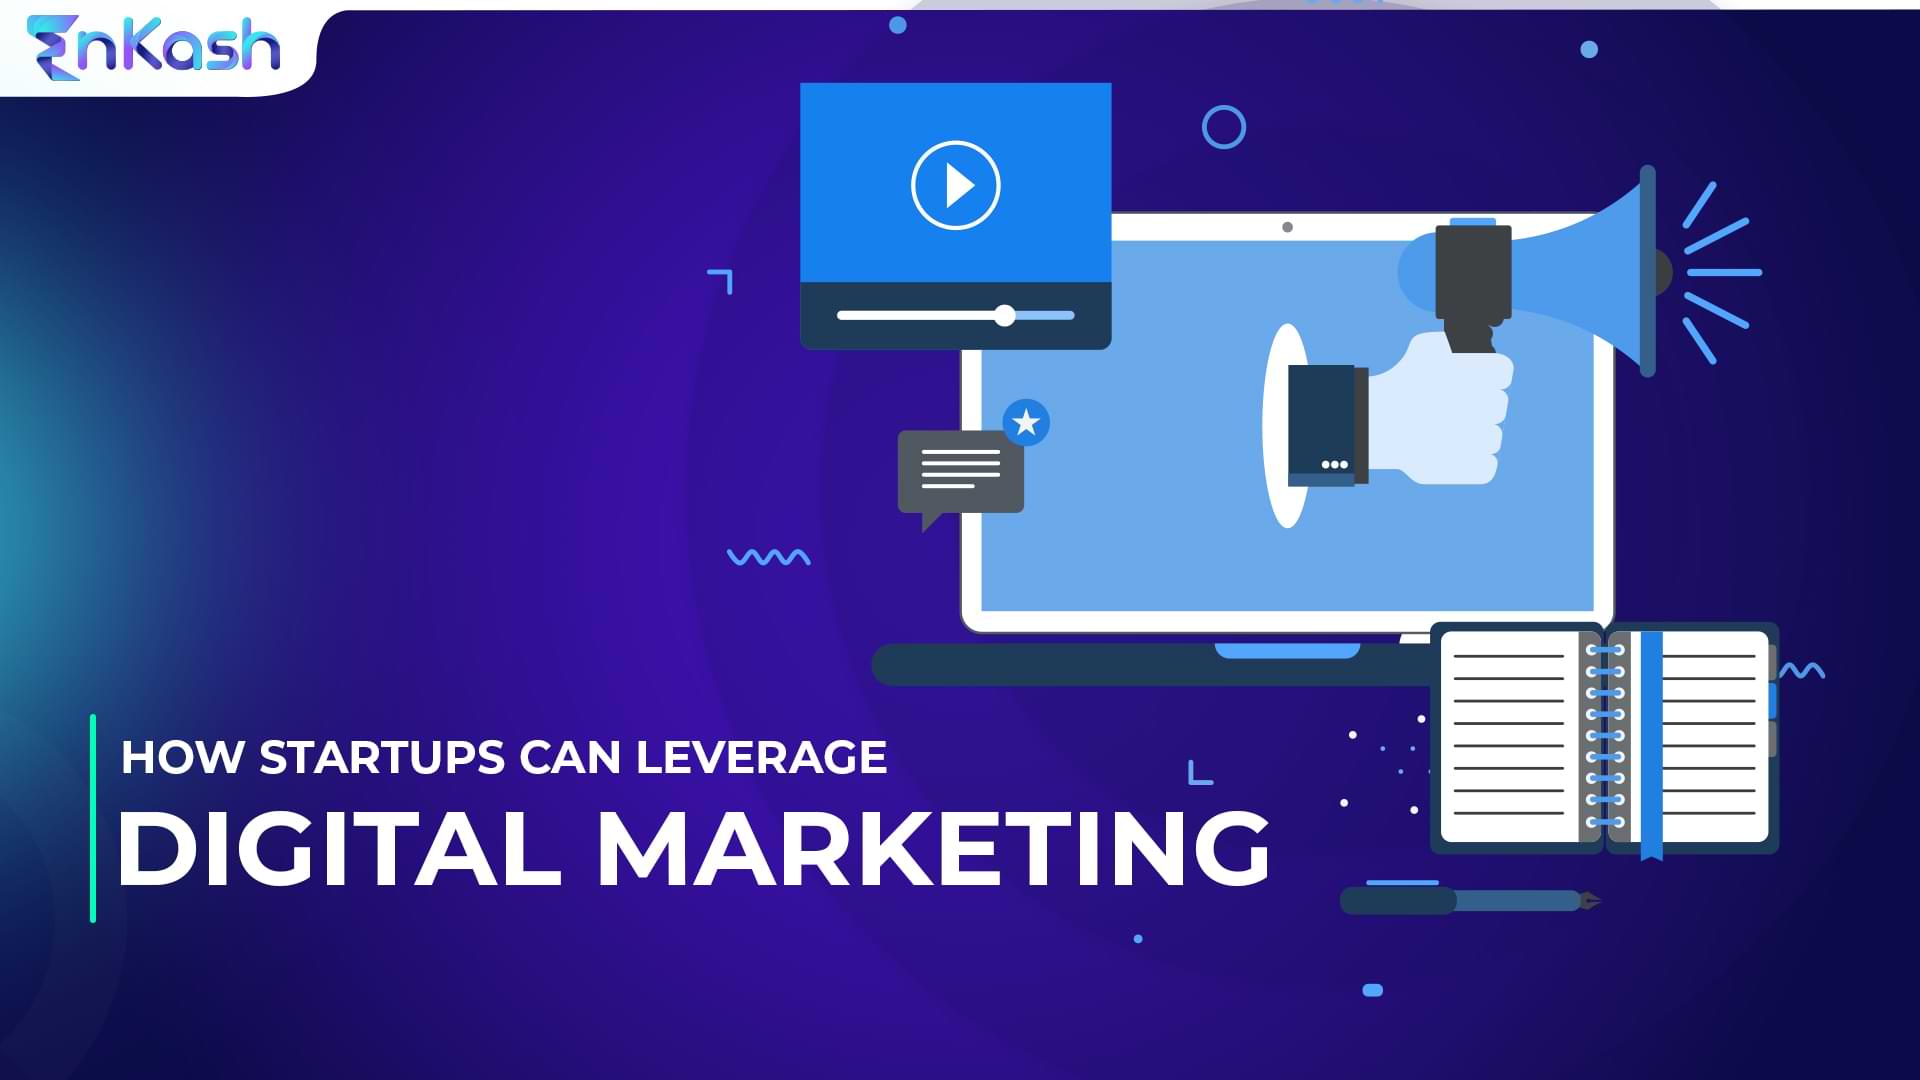 Digital Marketing for Startups: Advantages and Opportunities